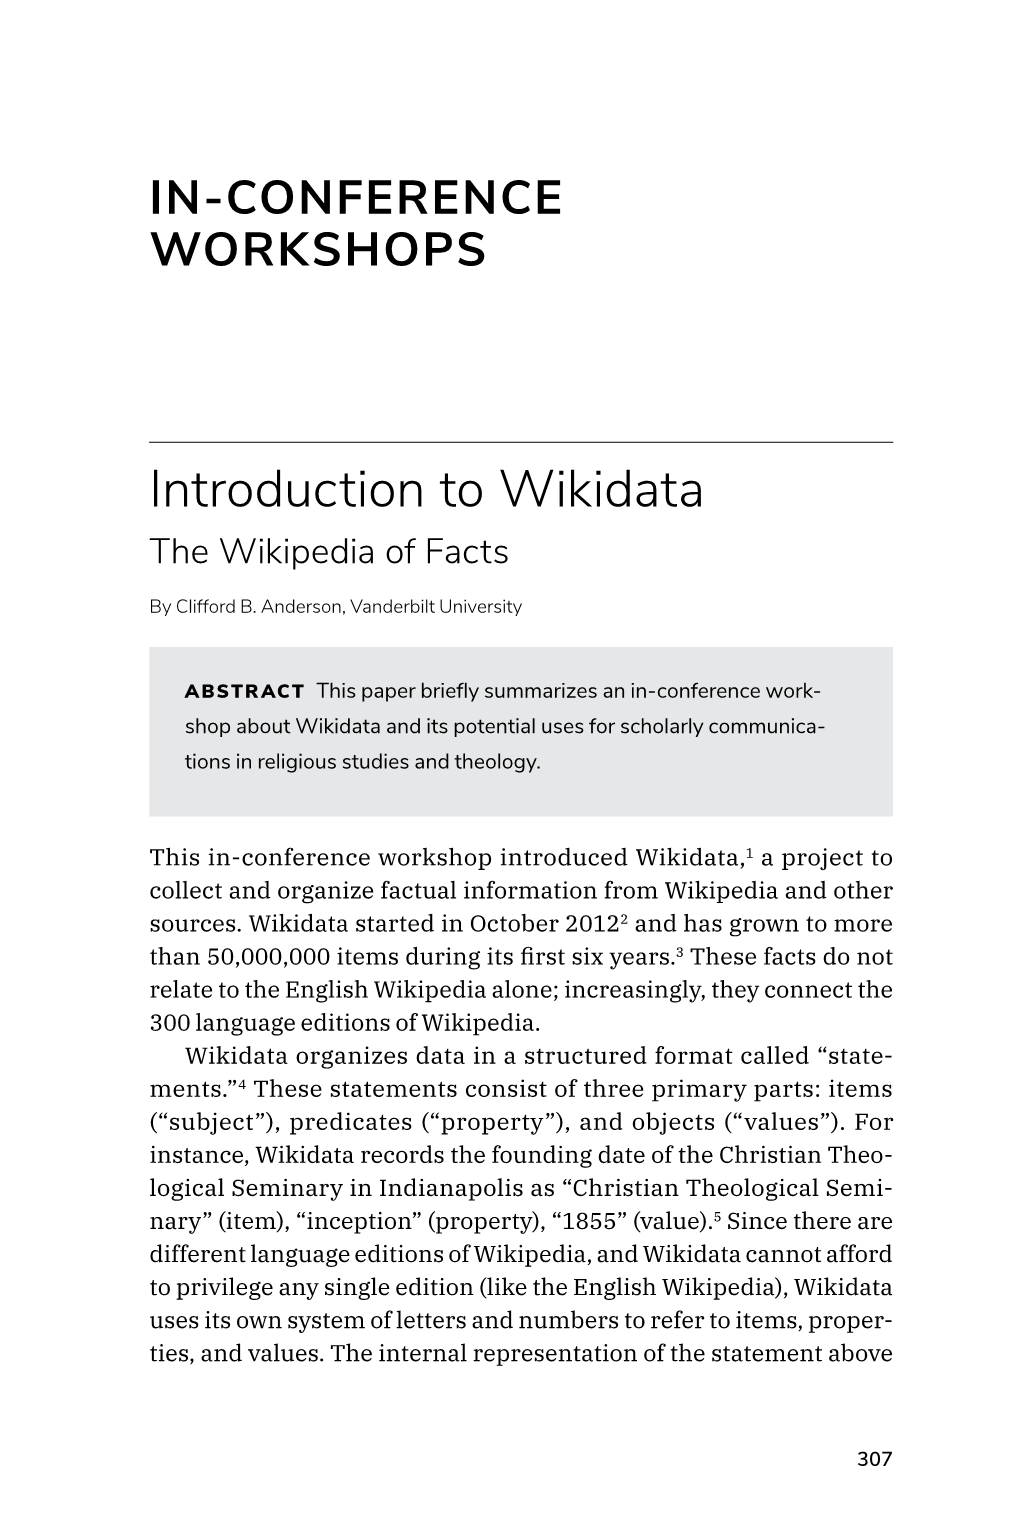 Introduction to Wikidata the Wikipedia of Facts